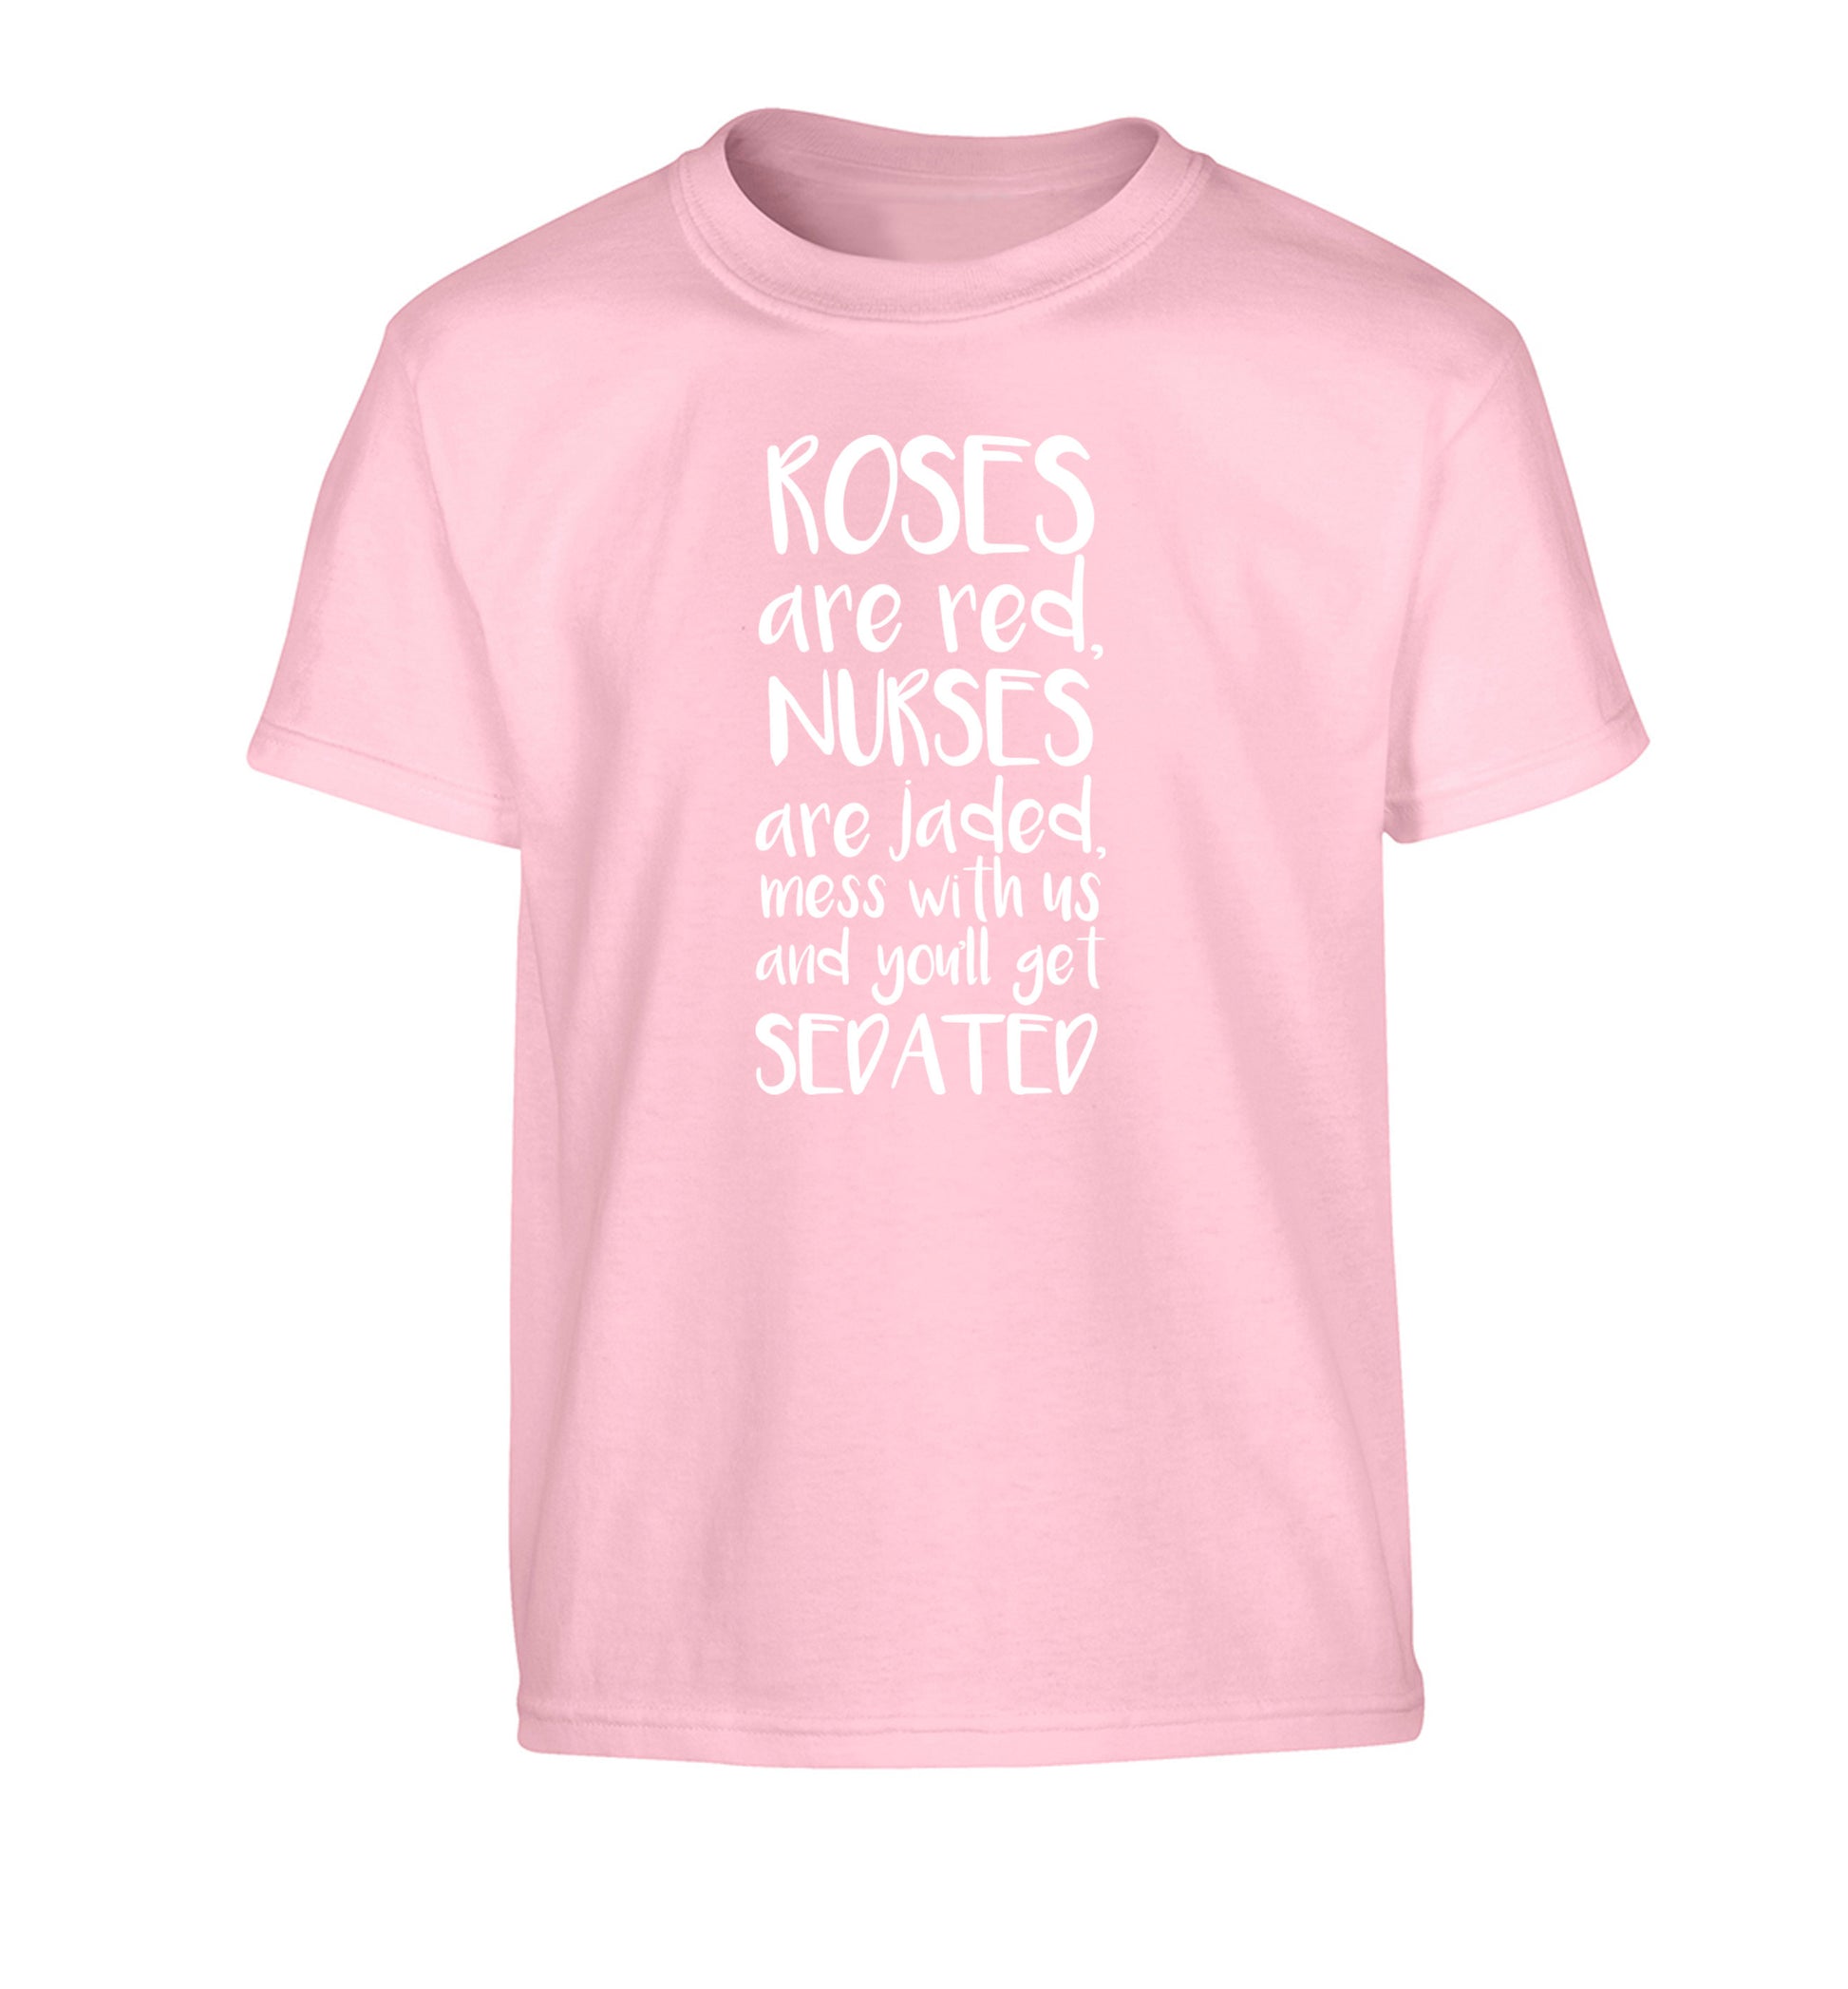 Roses are red, nurses are jaded, mess with us and you'll get sedated Children's light pink Tshirt 12-14 Years